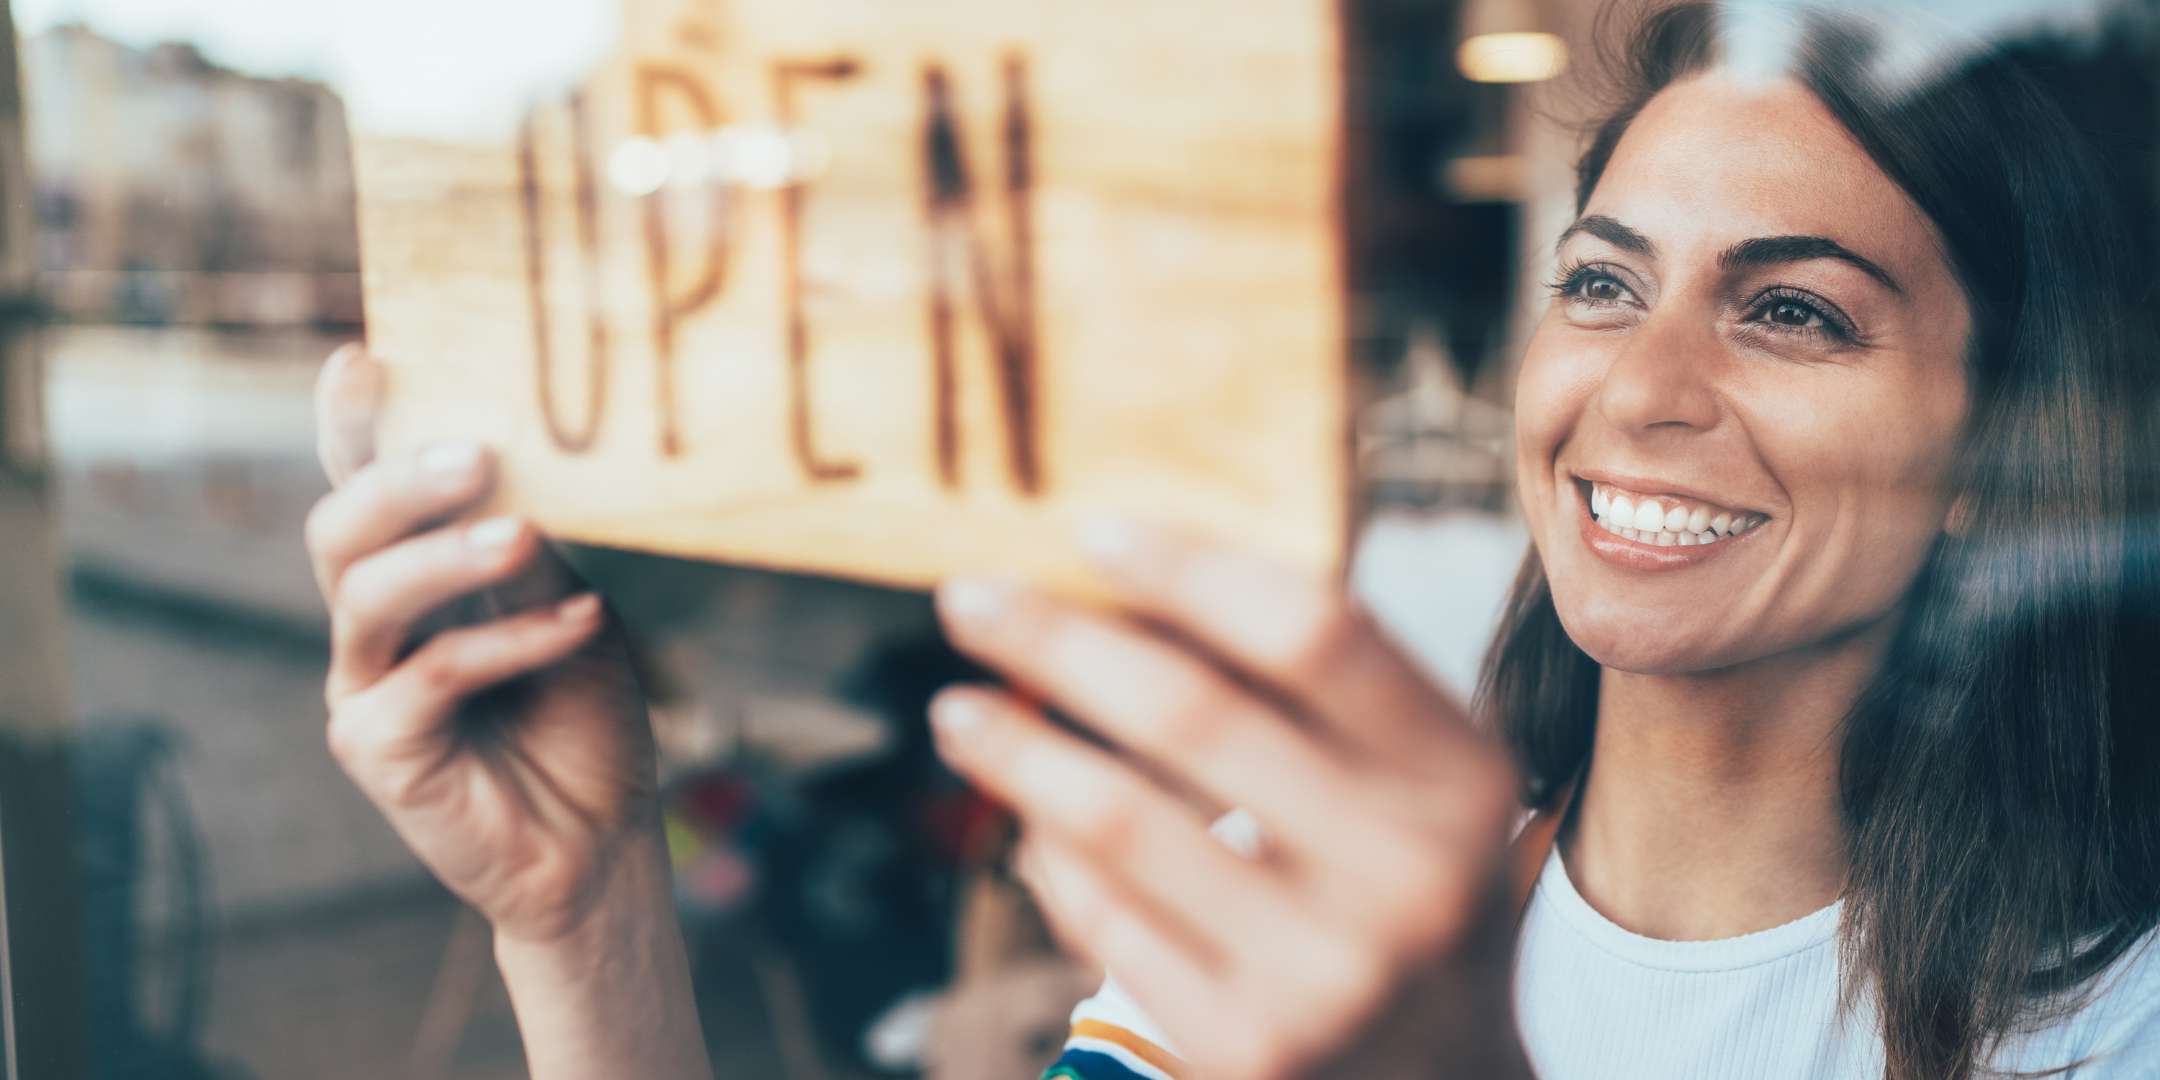 Portrait of a happy business owner hanging an open sign on the door at a cafe and smiling